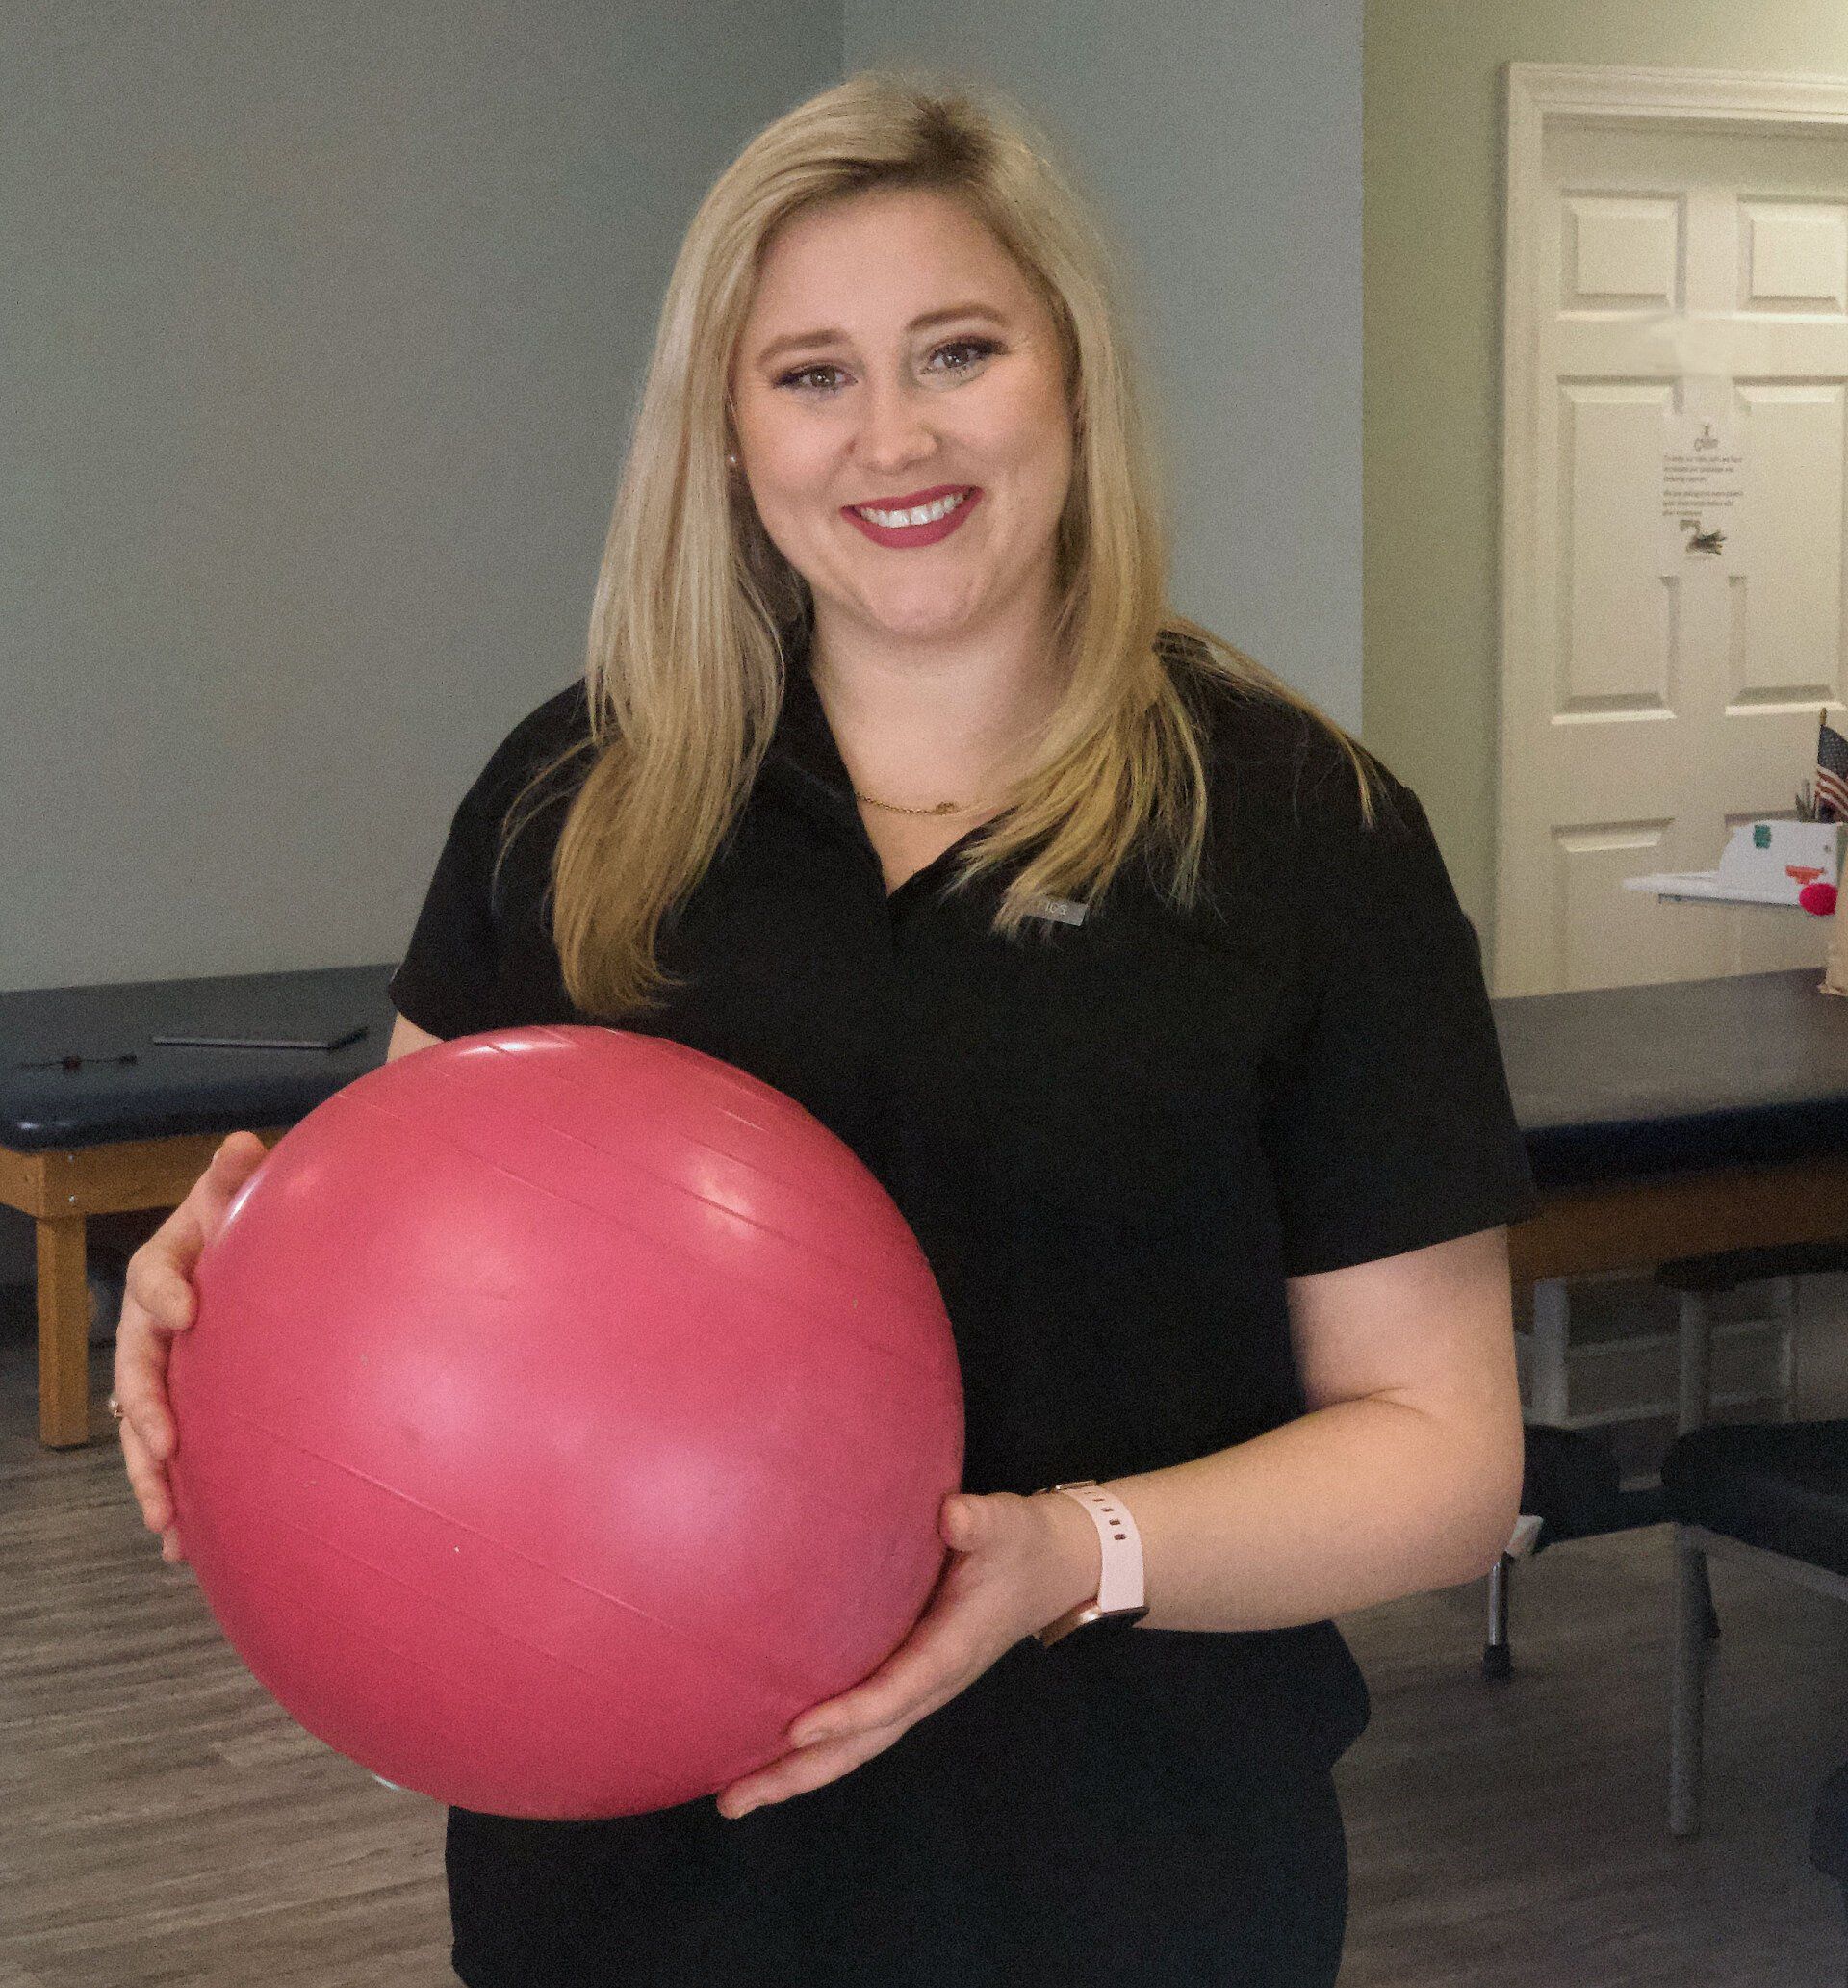 Physical therapy — Genesis Physical Therapy in Ridgeland, MS